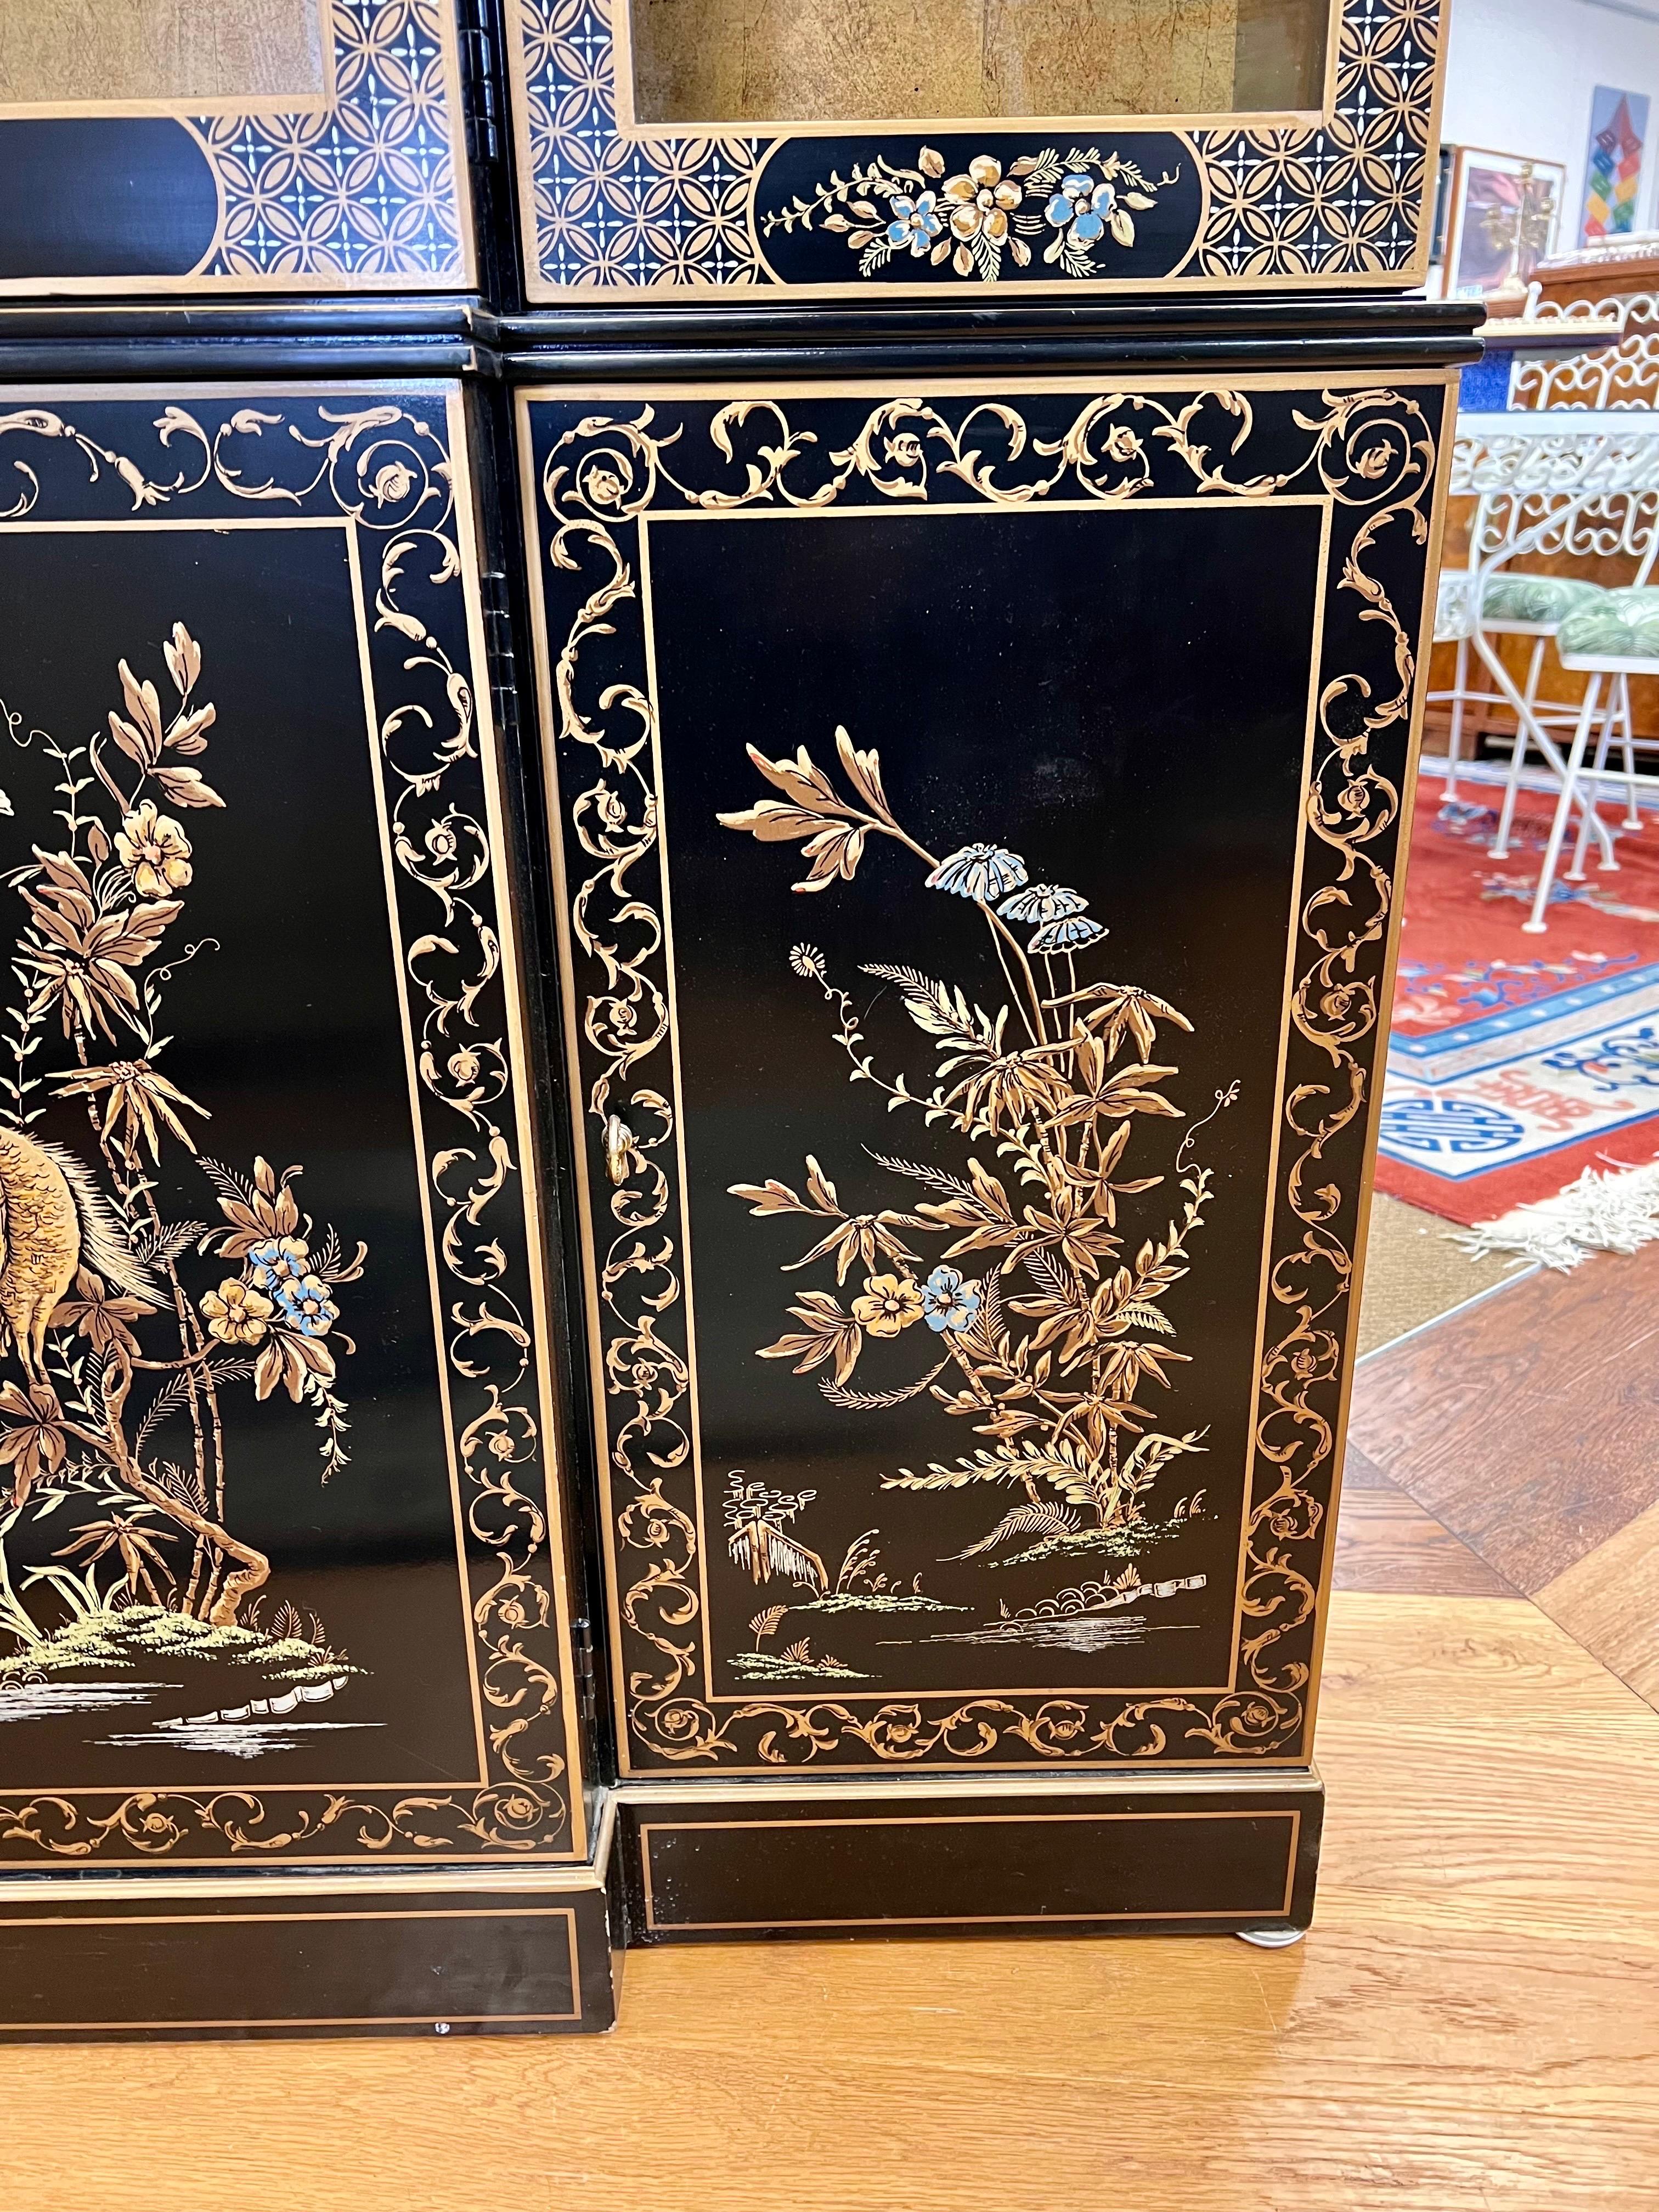 Stunning Drexel Et Cetera liine china cabinet circa 1978.  Features Chinoiserie japanned black lacquer hand painted motif with gold detail showing landscape of florals/flowers/animals/birds and butterfly.  The cabinet is fully electrified and comes